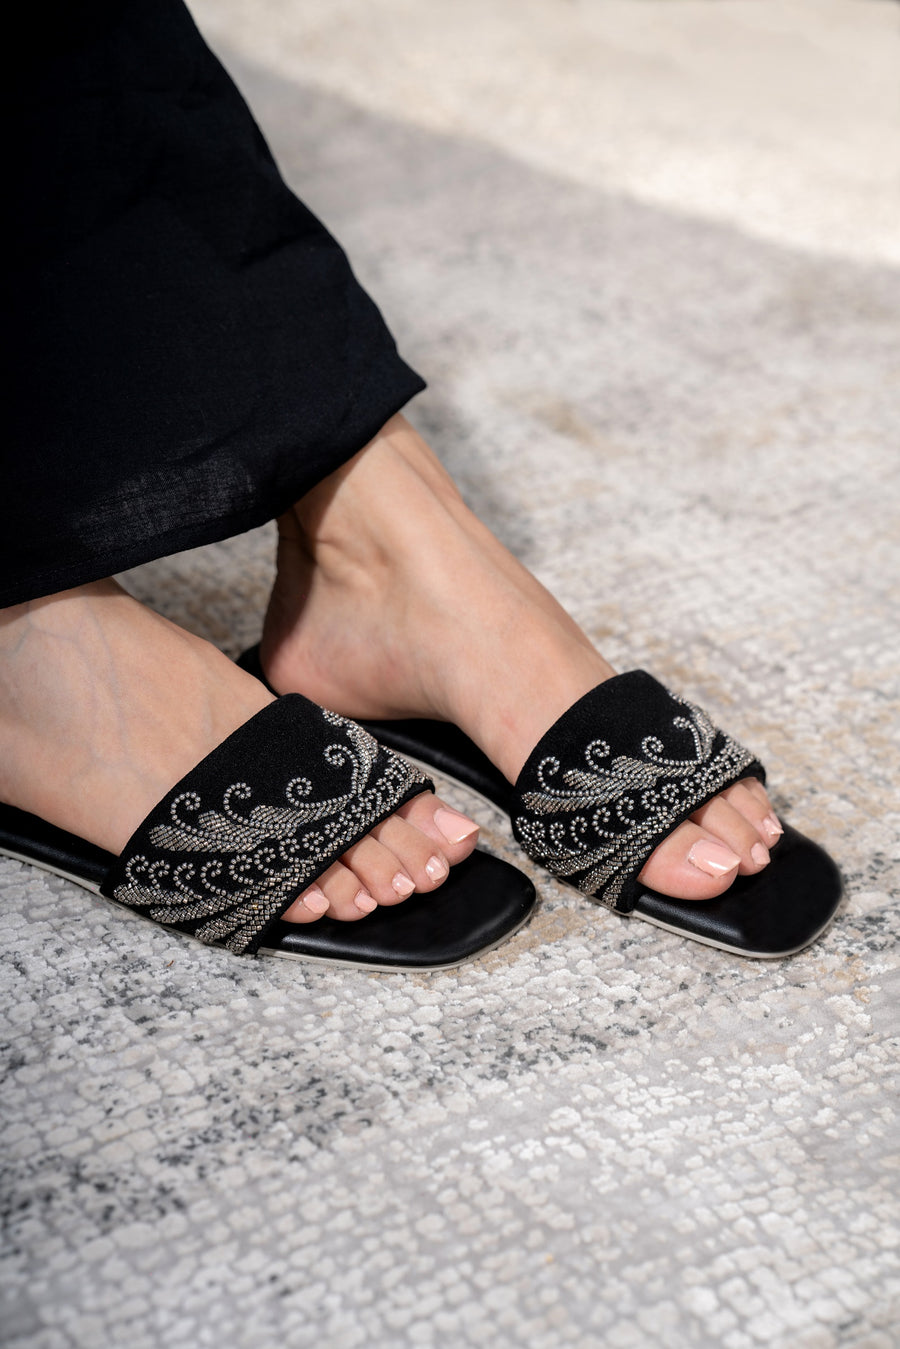 Black Slides With Metallic Embroidery